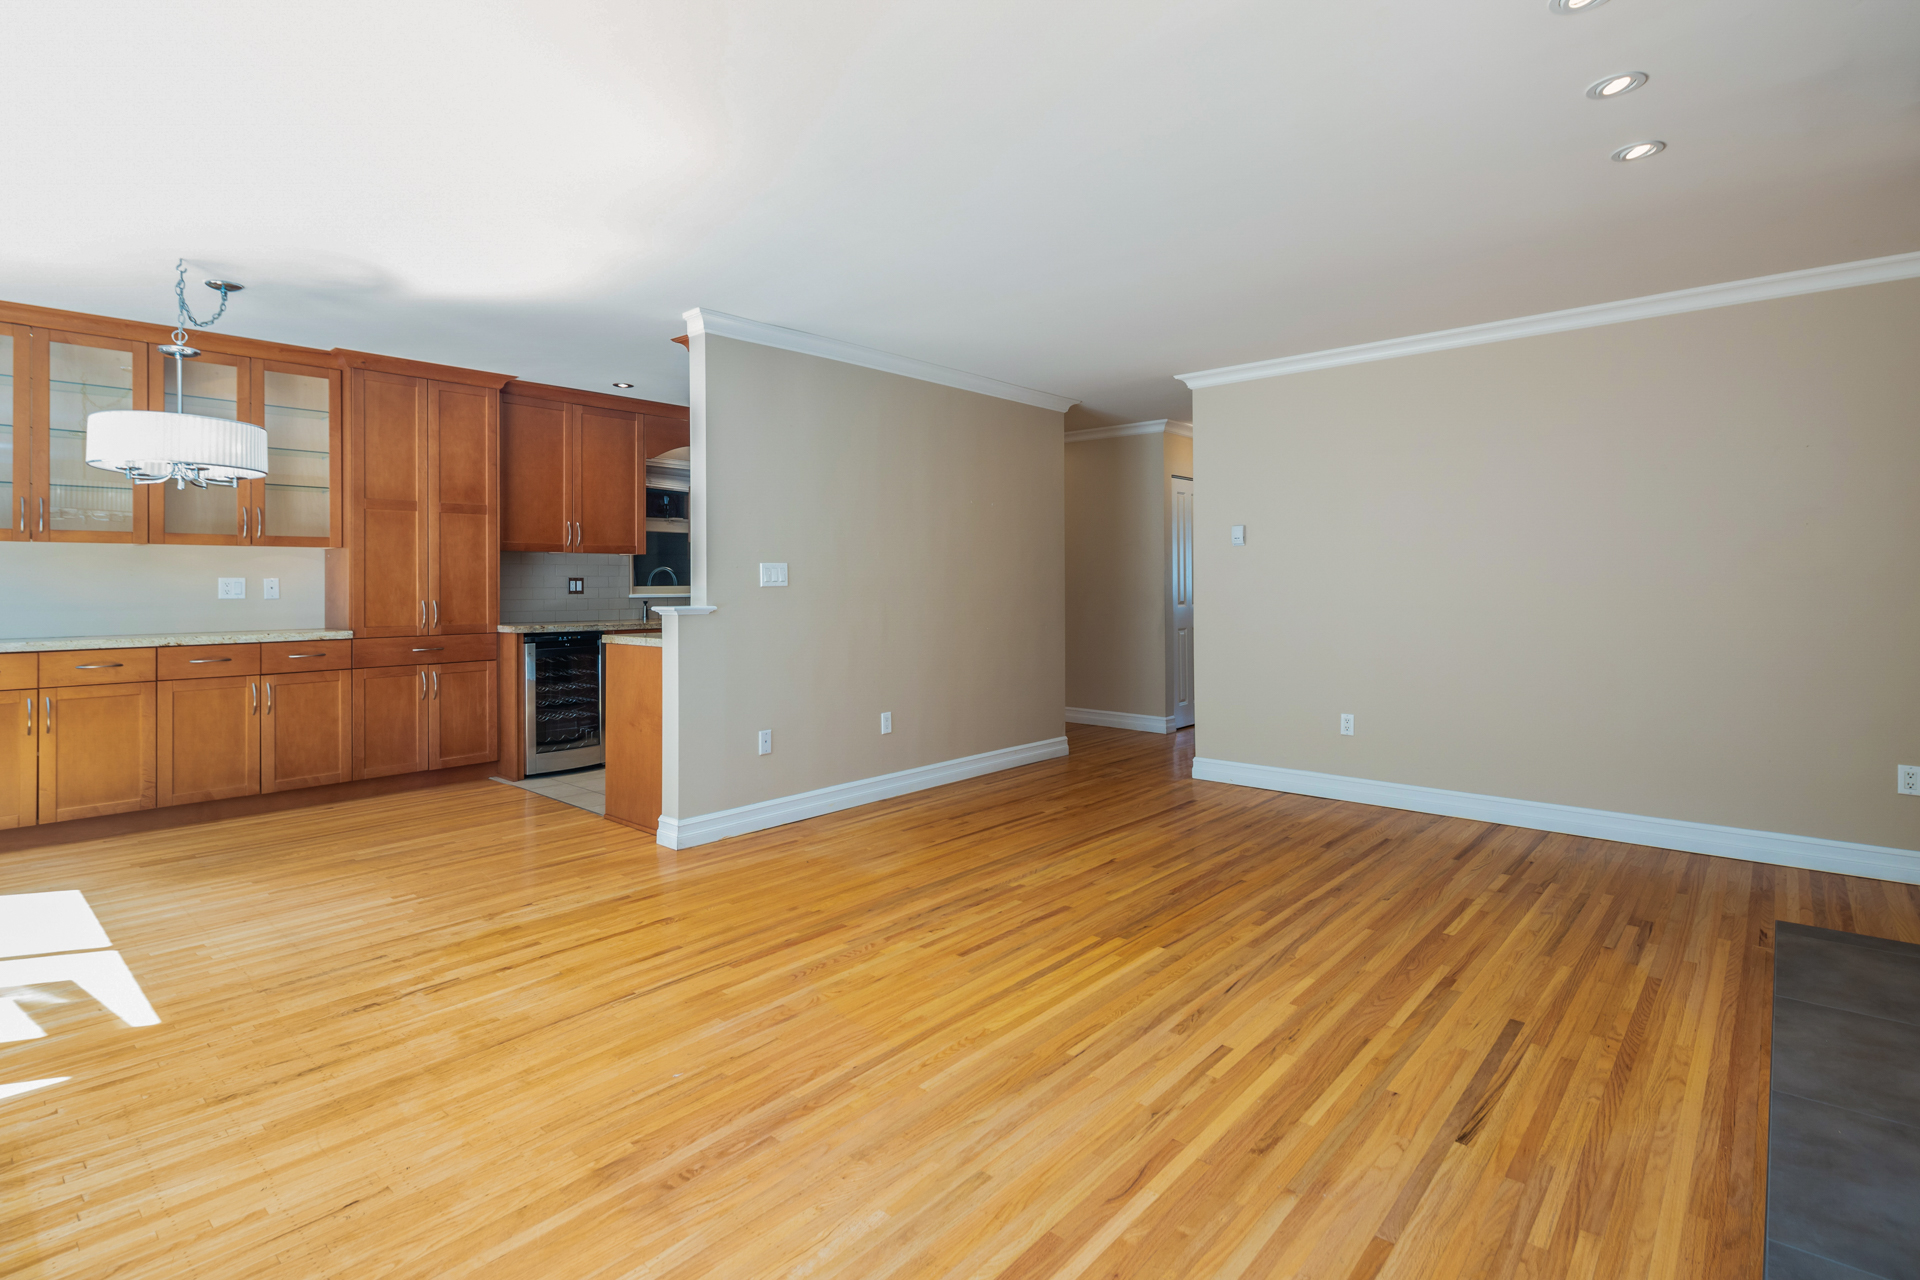 603 235 Keith Road, Spuraway Gardens, West Vancouver - For Sale - Image 3